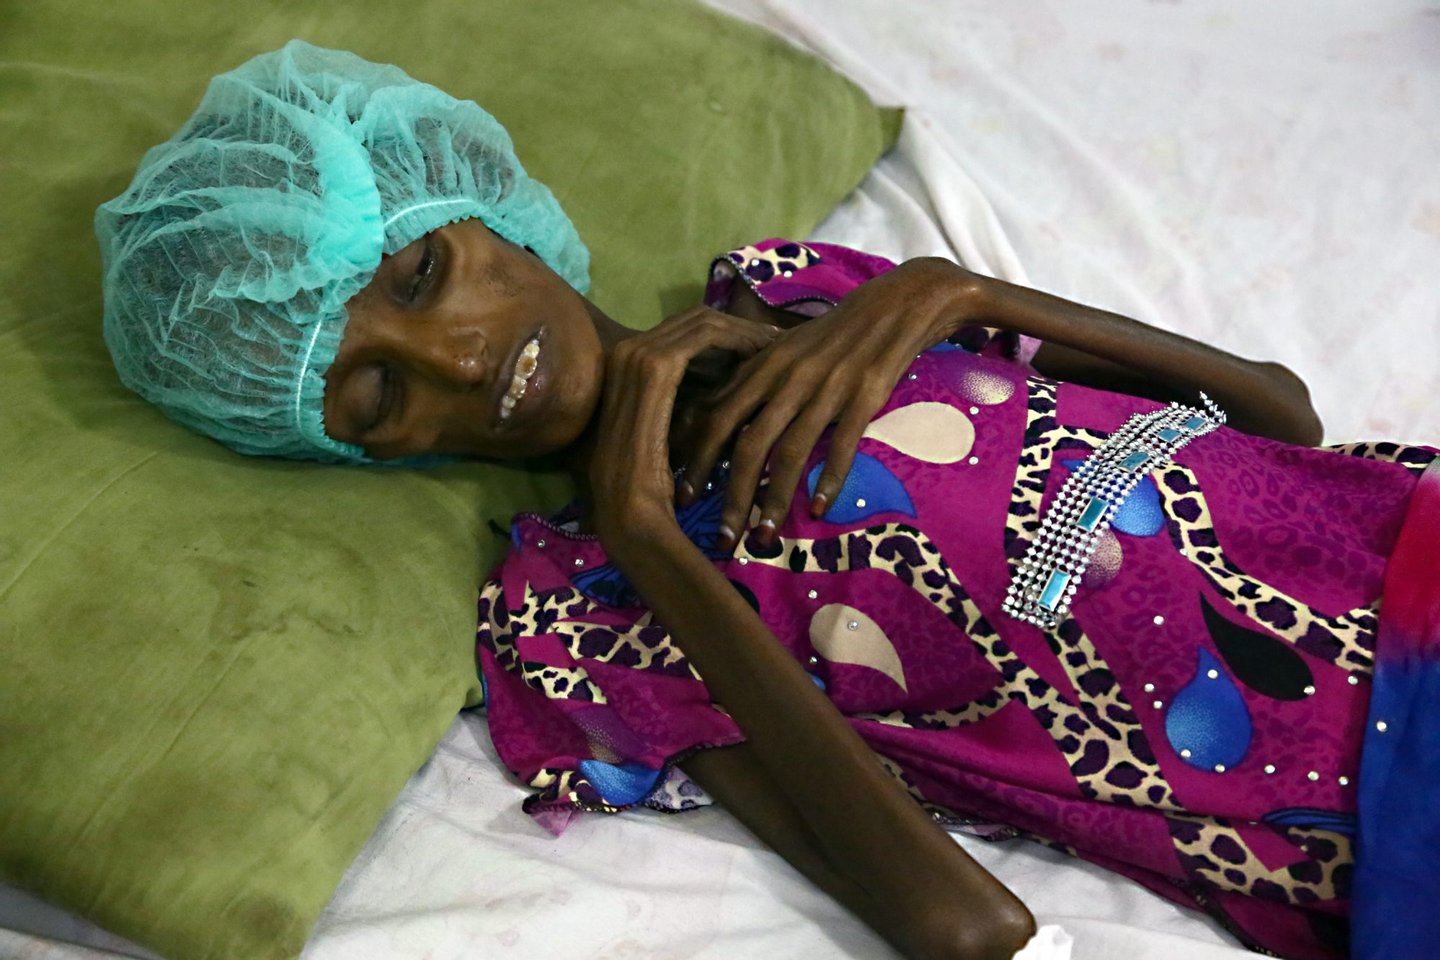 Saida Ahmad Baghili, an 18-year-old Yemeni woman from an impoverished coastal village on the outskirts of the rebel-held Yemeni port city of Hodeida, where malnutrition has hit the population hard, lies in a bed at the al-Thawra hospital in Hodeidah where she is receiving treatment for severe malnutrition on October 25, 2016. The UN's children agency UNICEF estimates that three million people are in need of immediate food supplies in Yemen, while 1.5 million children suffer from malnutrition. / AFP / STRINGER (Photo credit should read STRINGER/AFP/Getty Images)